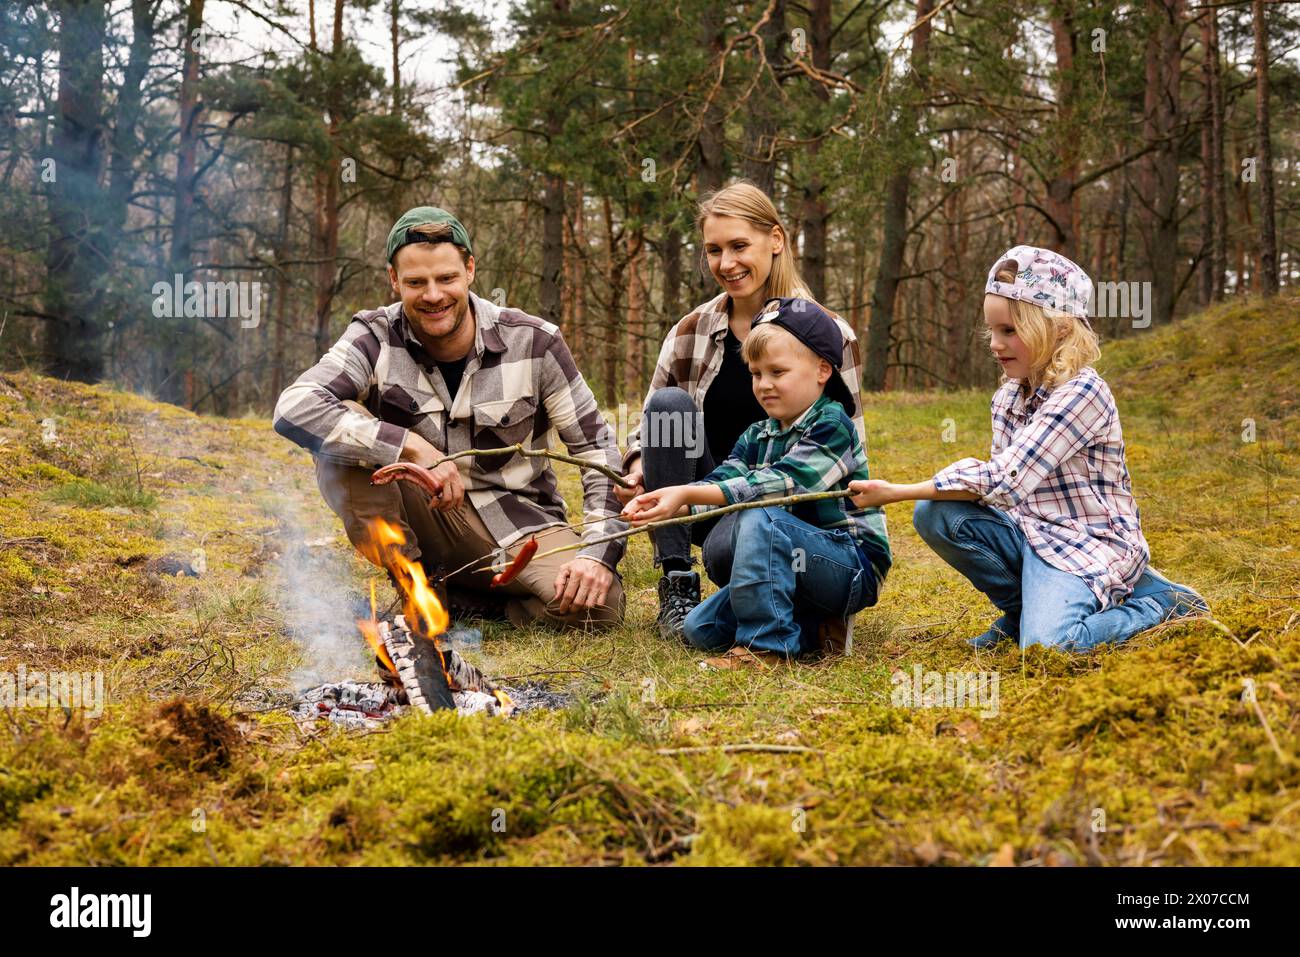 family with two children frying sausages over a bonfire while camping in forest. family time, nature adventure Stock Photo